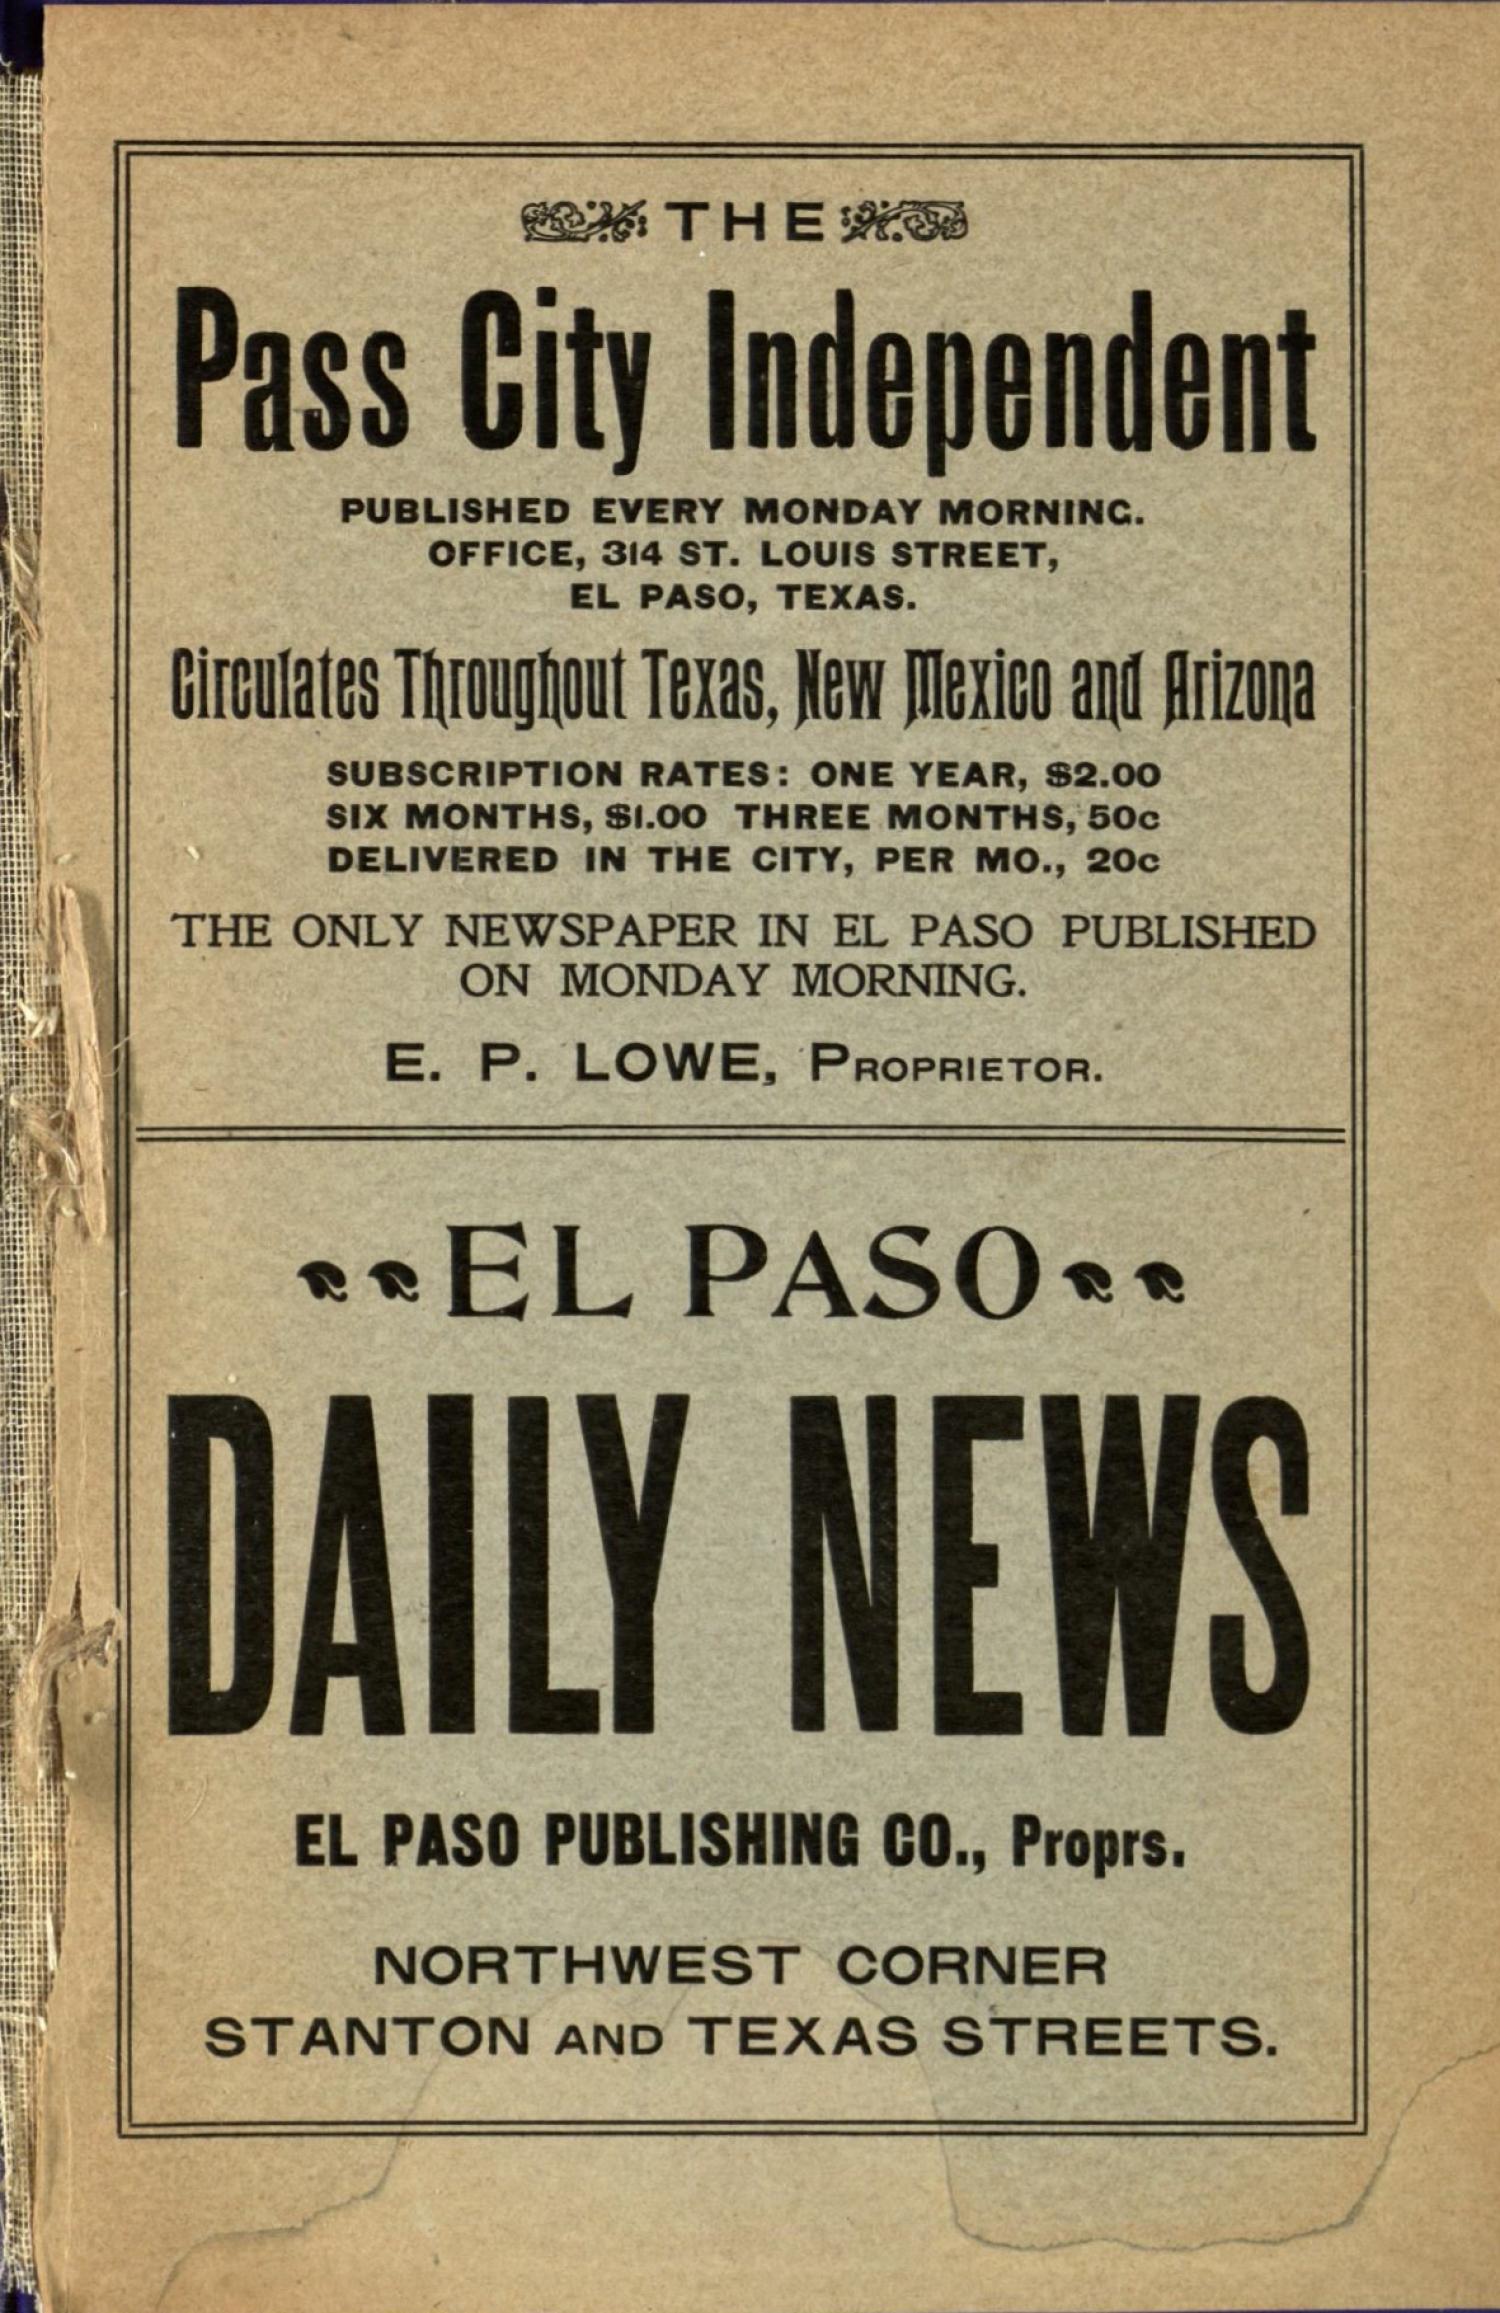 Worley's Directory of the City of El Paso, Texas 1901
                                                
                                                    Back Inside
                                                